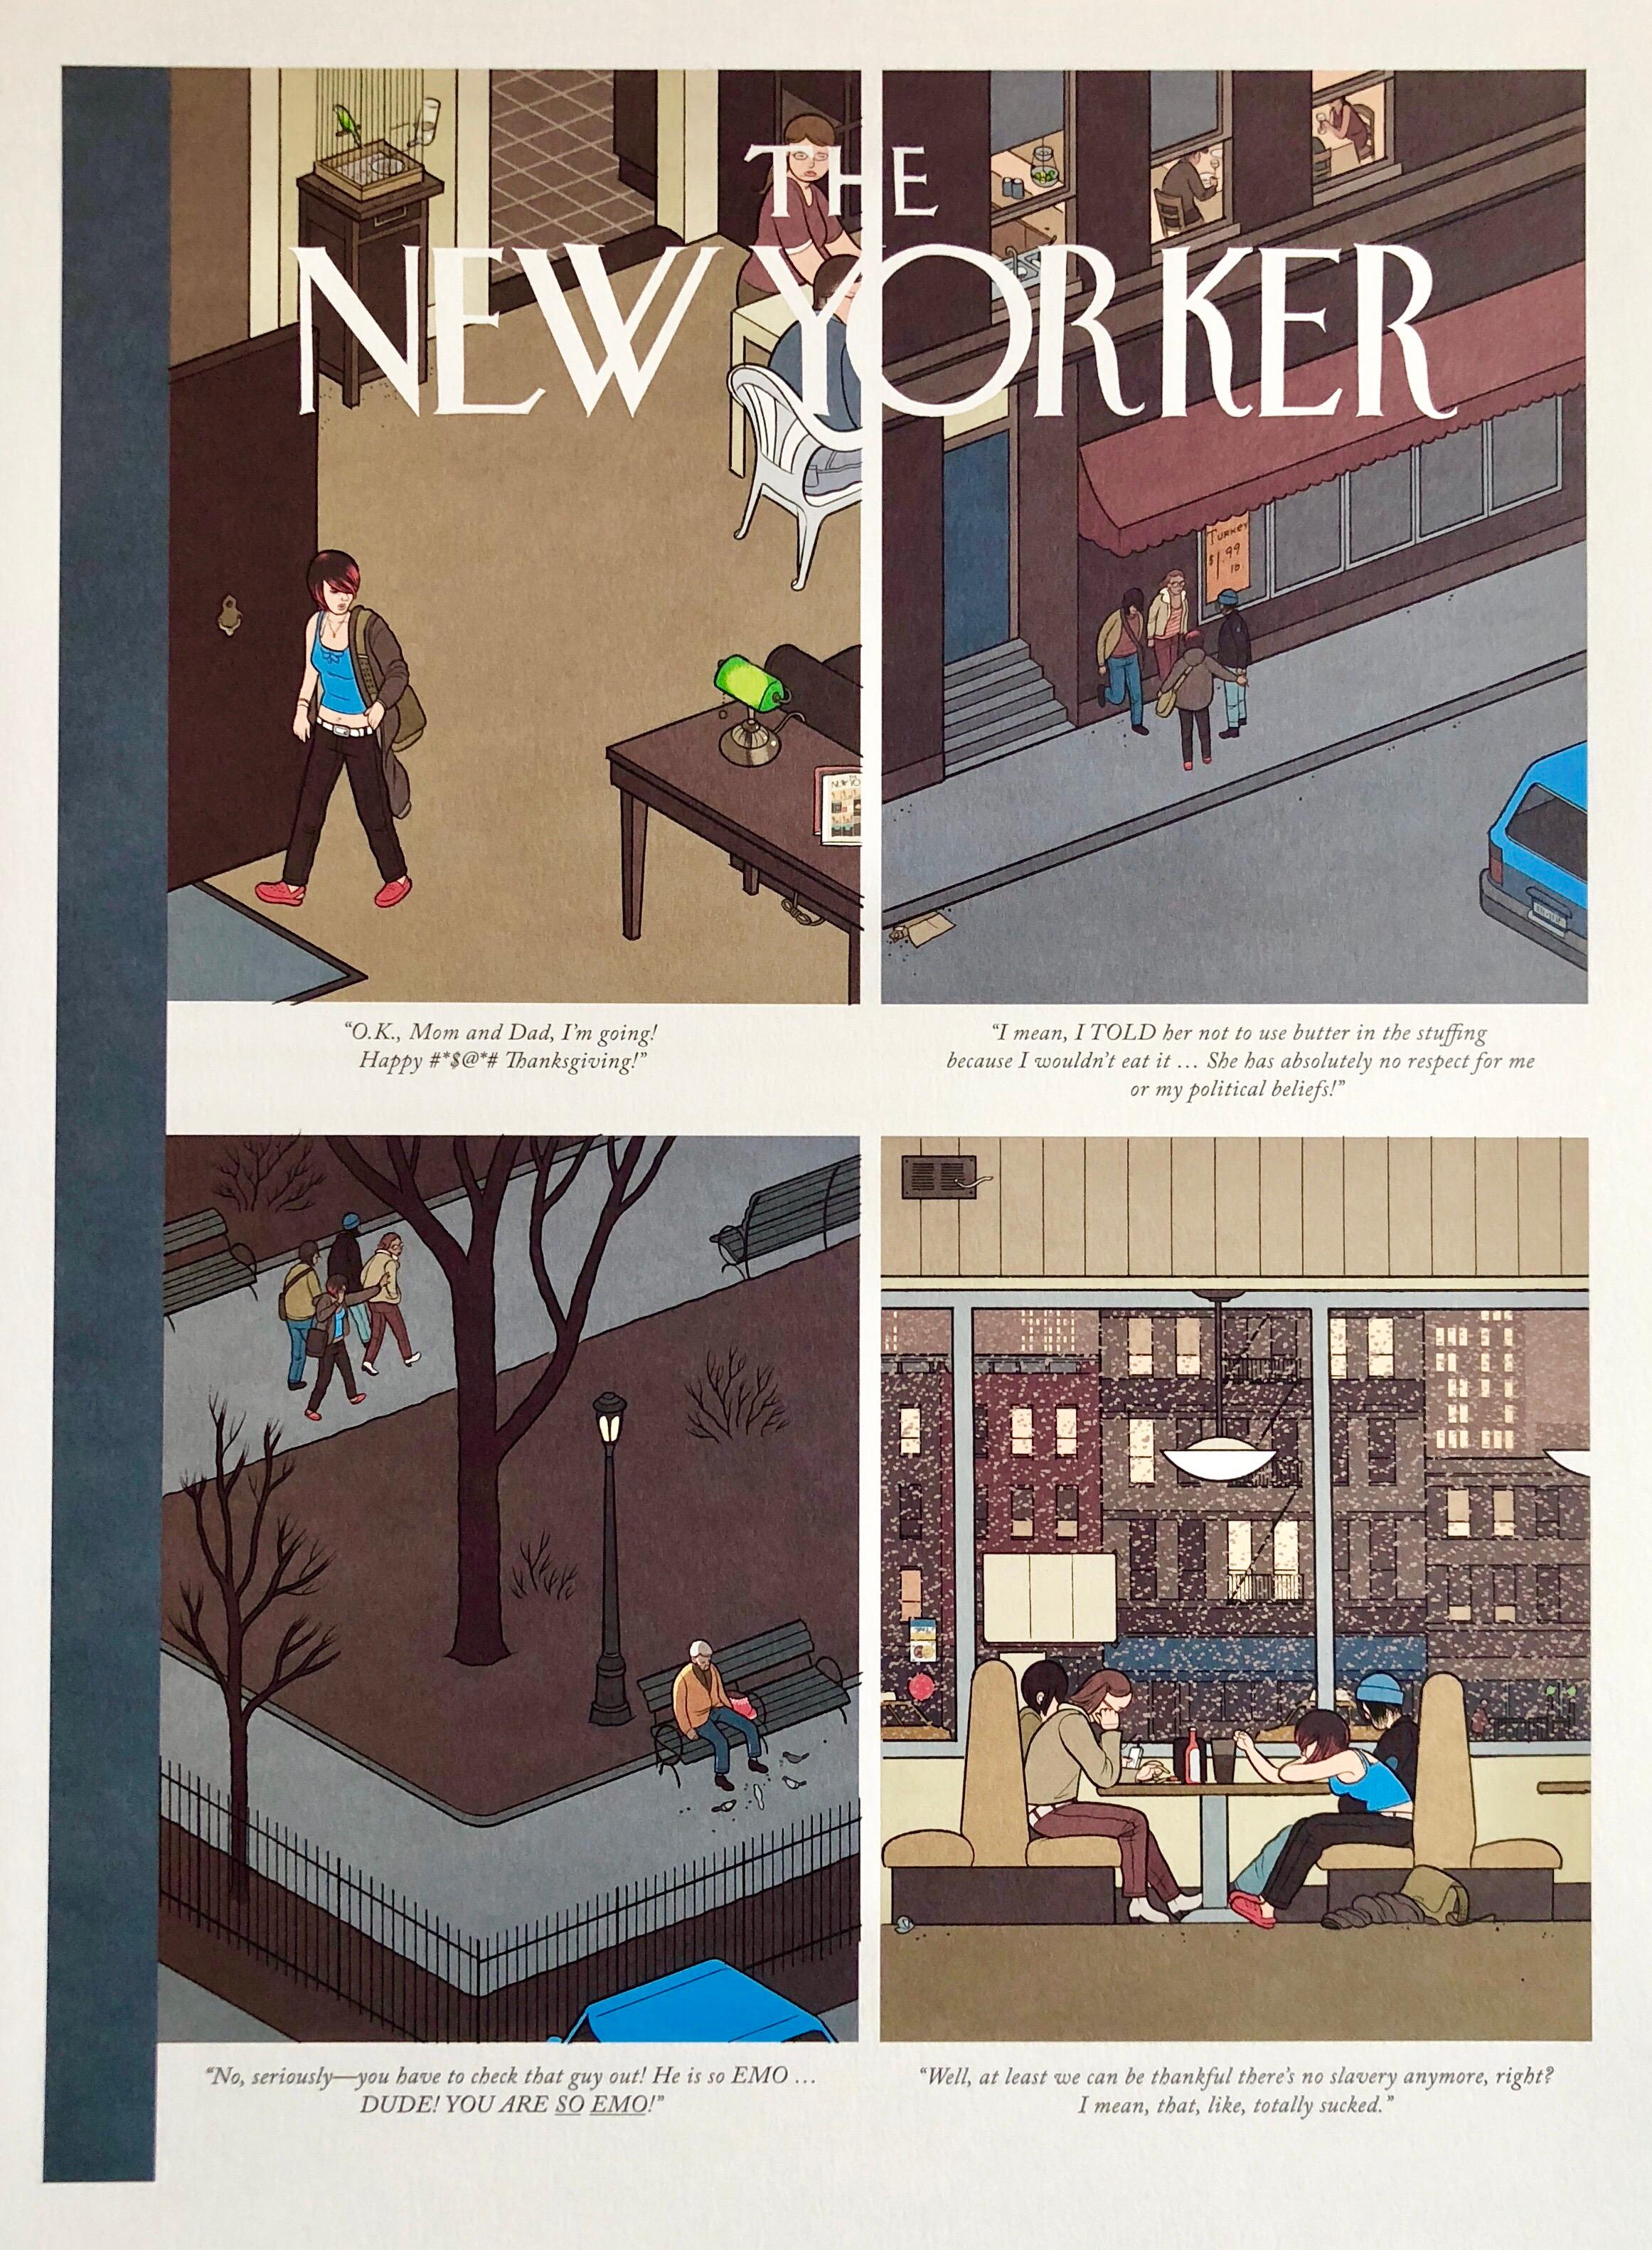 This is one print – printed in full color on 15" x 20" heavy cream-colored paper. 
It is from a limited edition series of 175, 
the portfolio is hand numbered and hand signed by Chris Ware. the individual prints are not.
The page with the hand